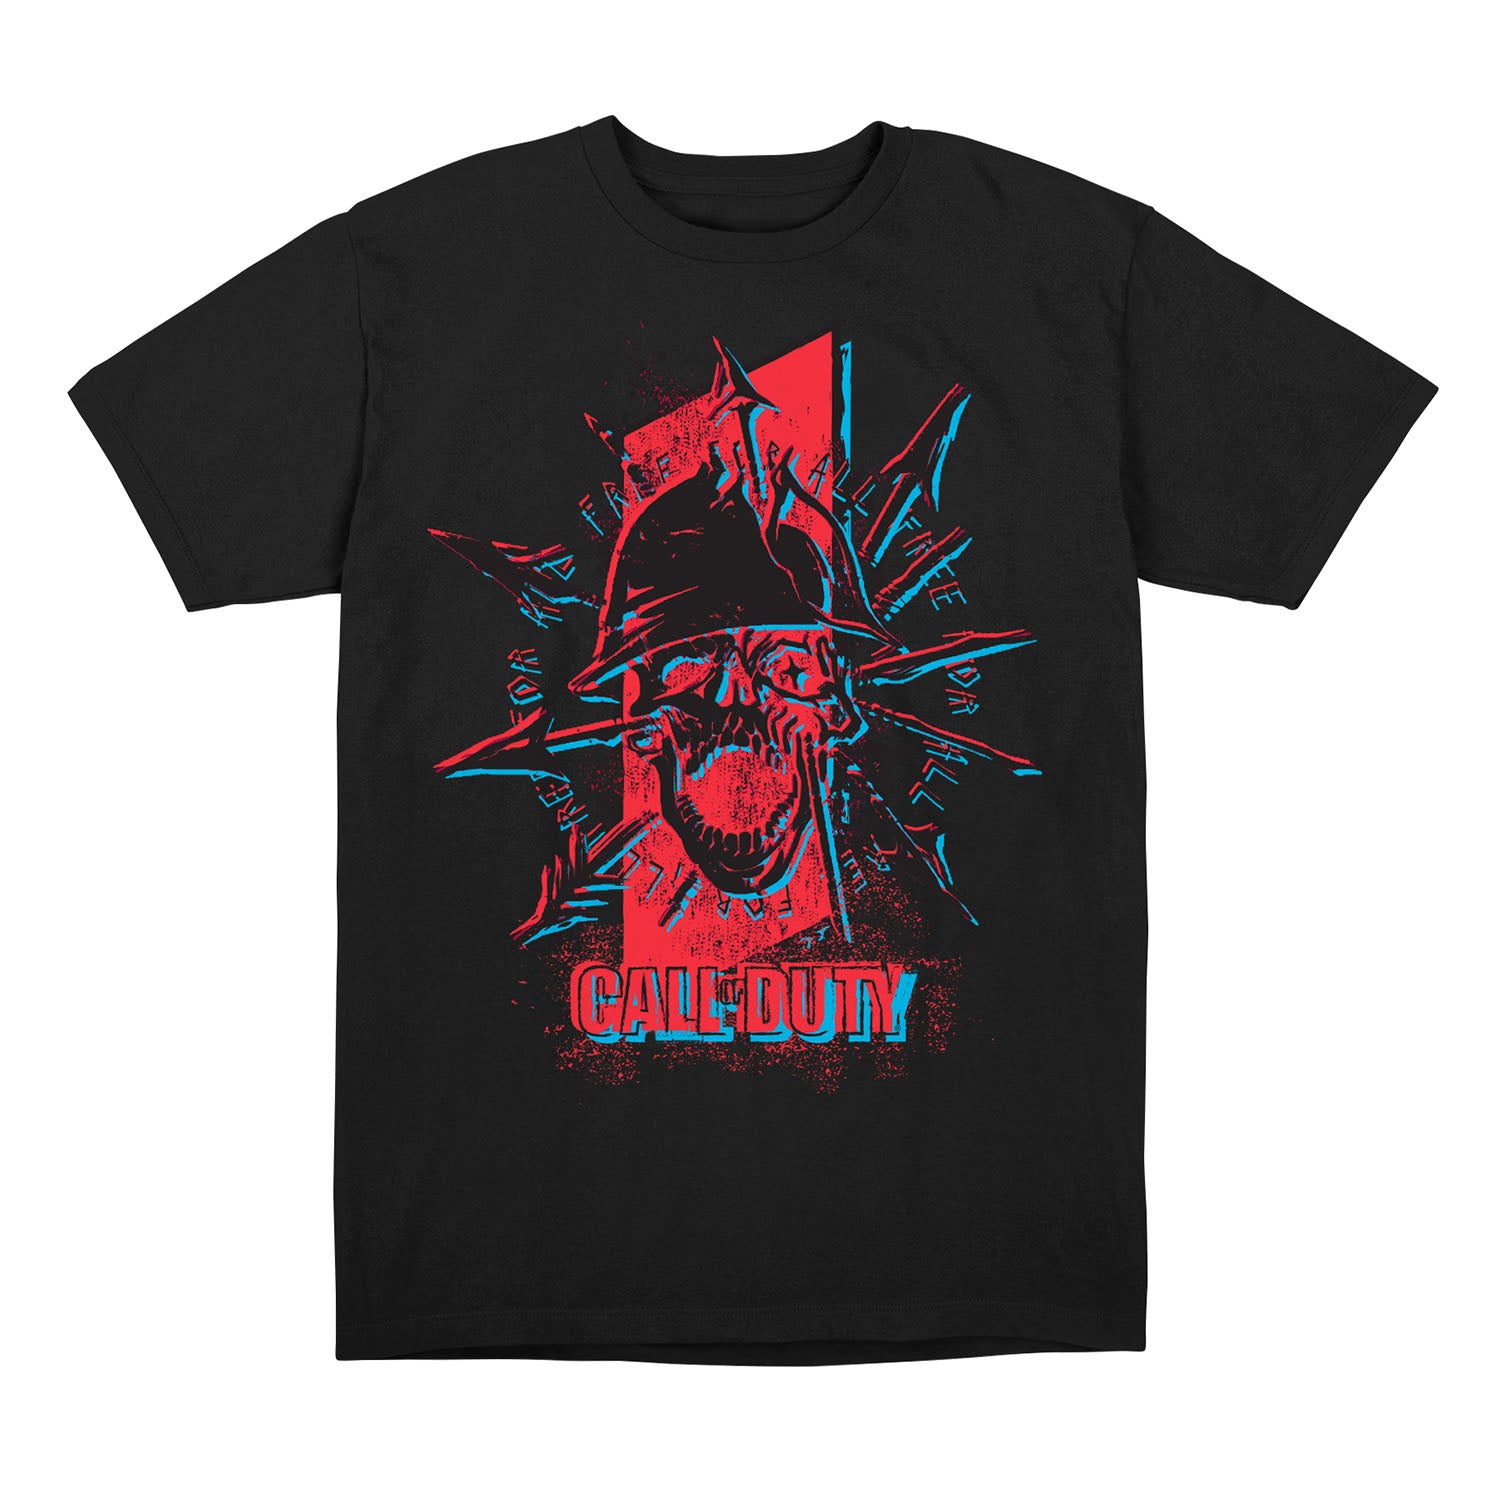 Call of Duty Arrows Black T-Shirt - Front View